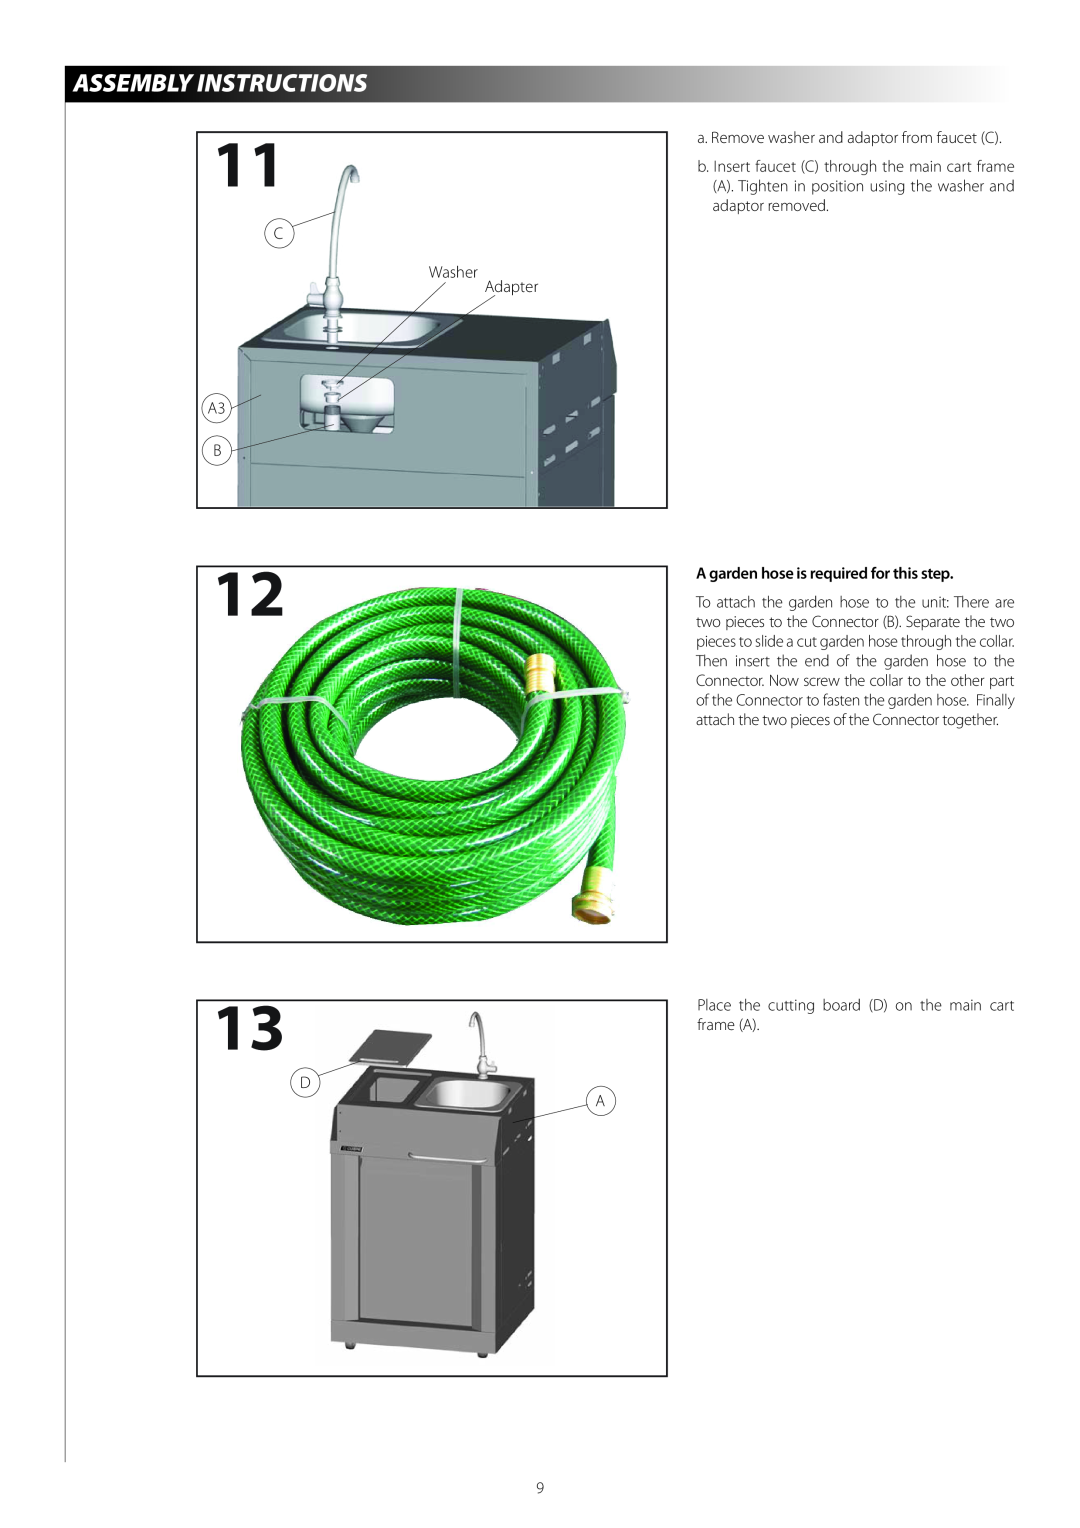 Centro 120407 warranty Assembly Instructions, A garden hose is required for this step 